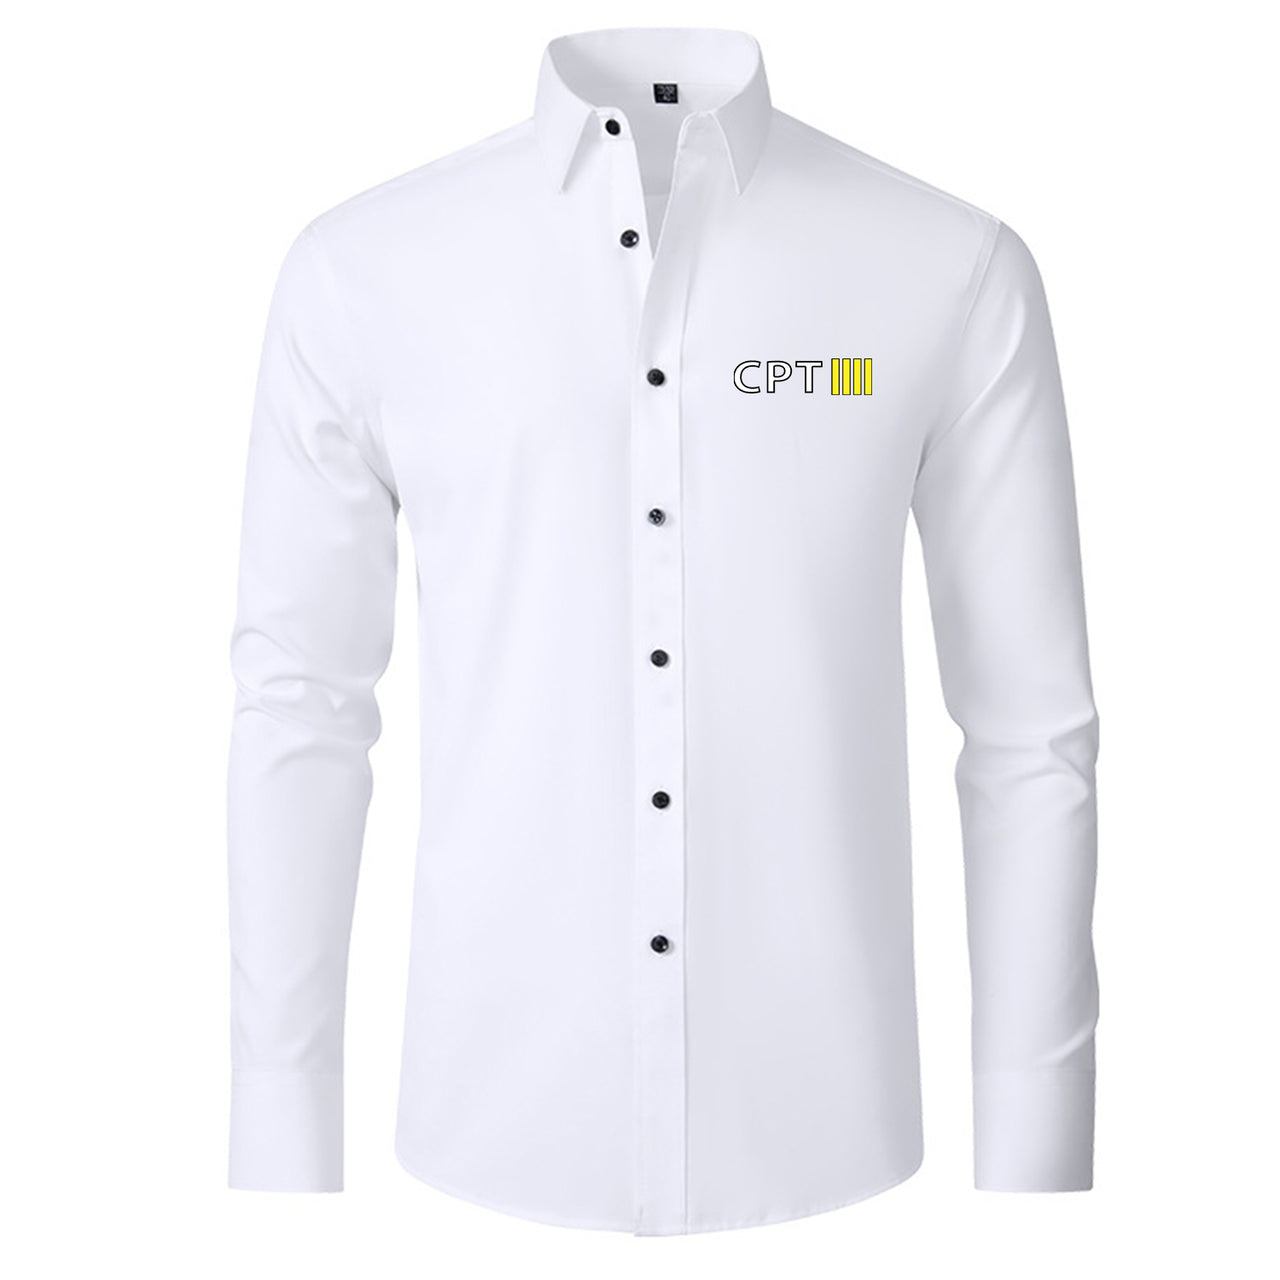 CPT & 4 Lines Designed Long Sleeve Shirts